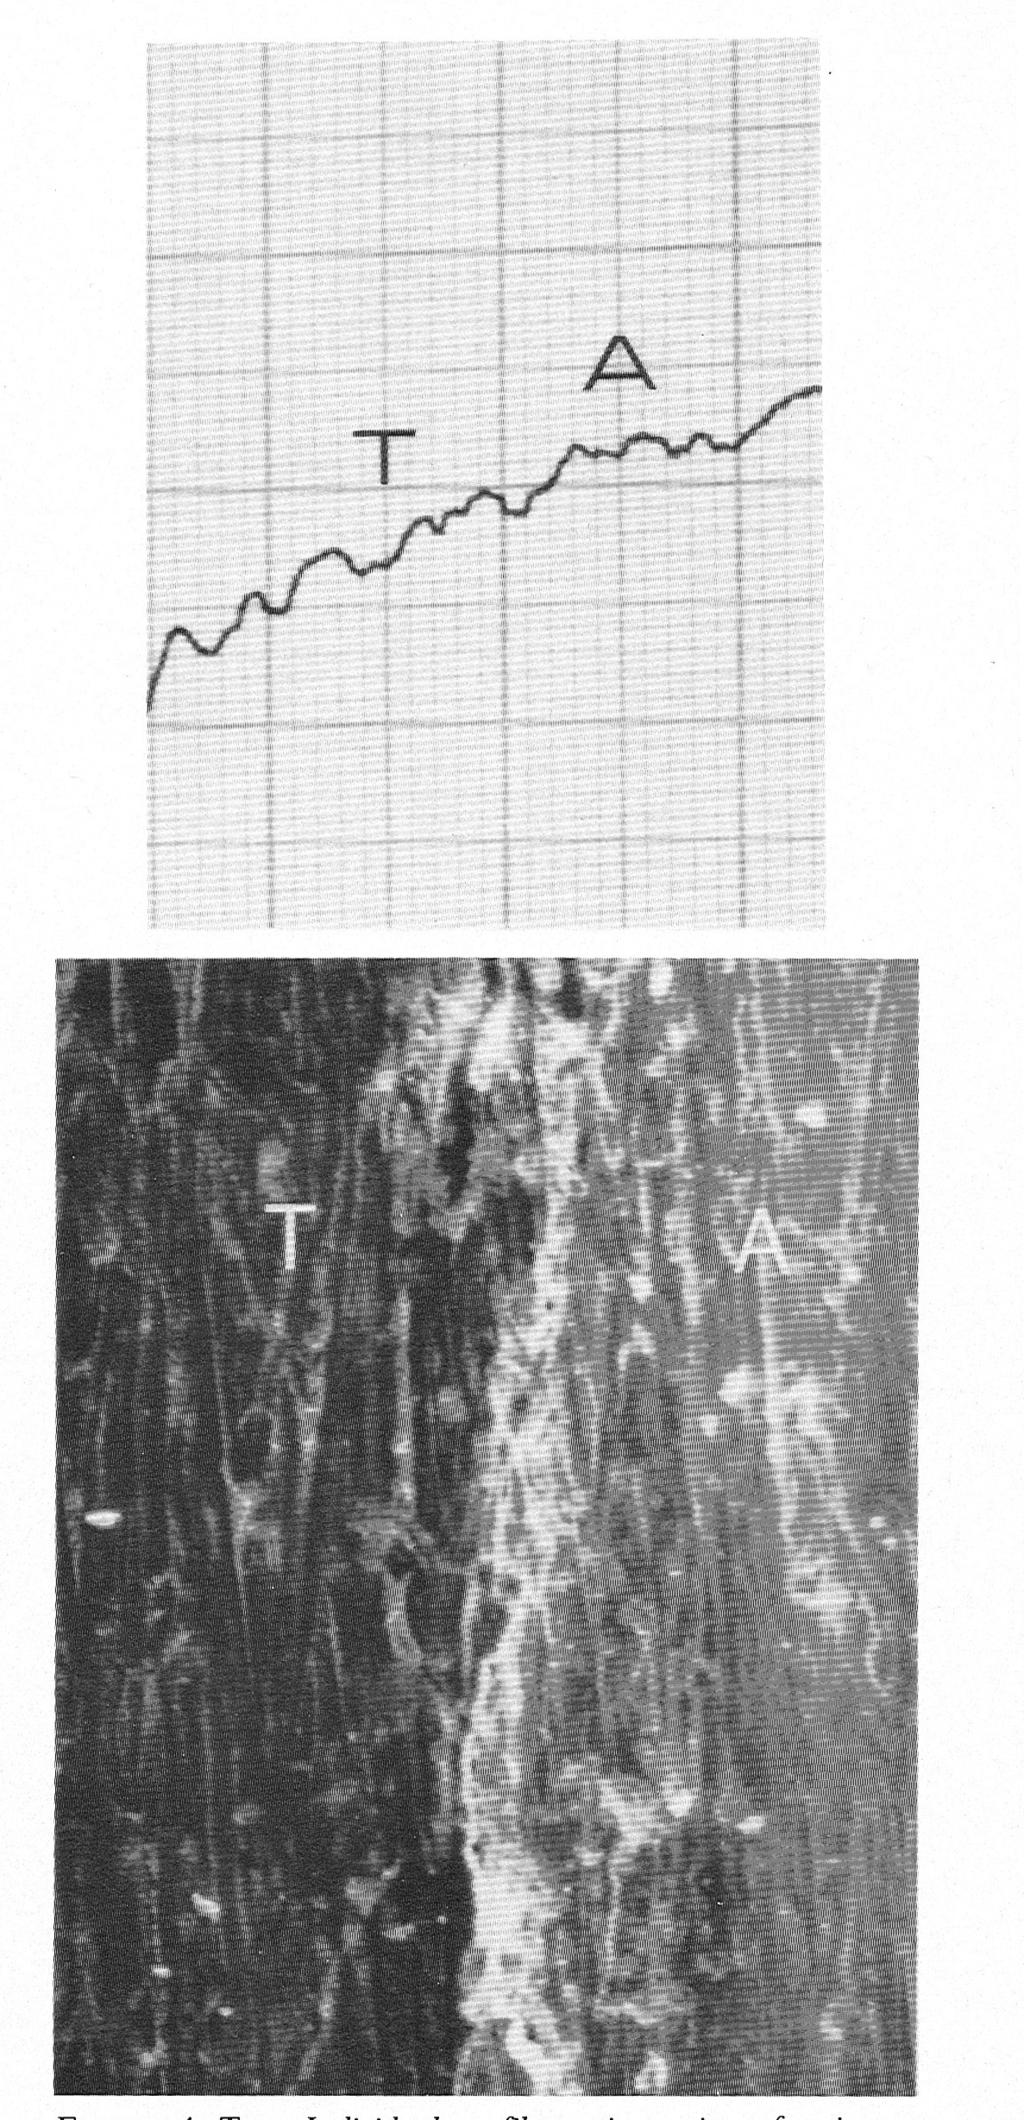 Top: Individual profilometric tracing after instrumentation with a reciprocating motor-driven diamond tip.